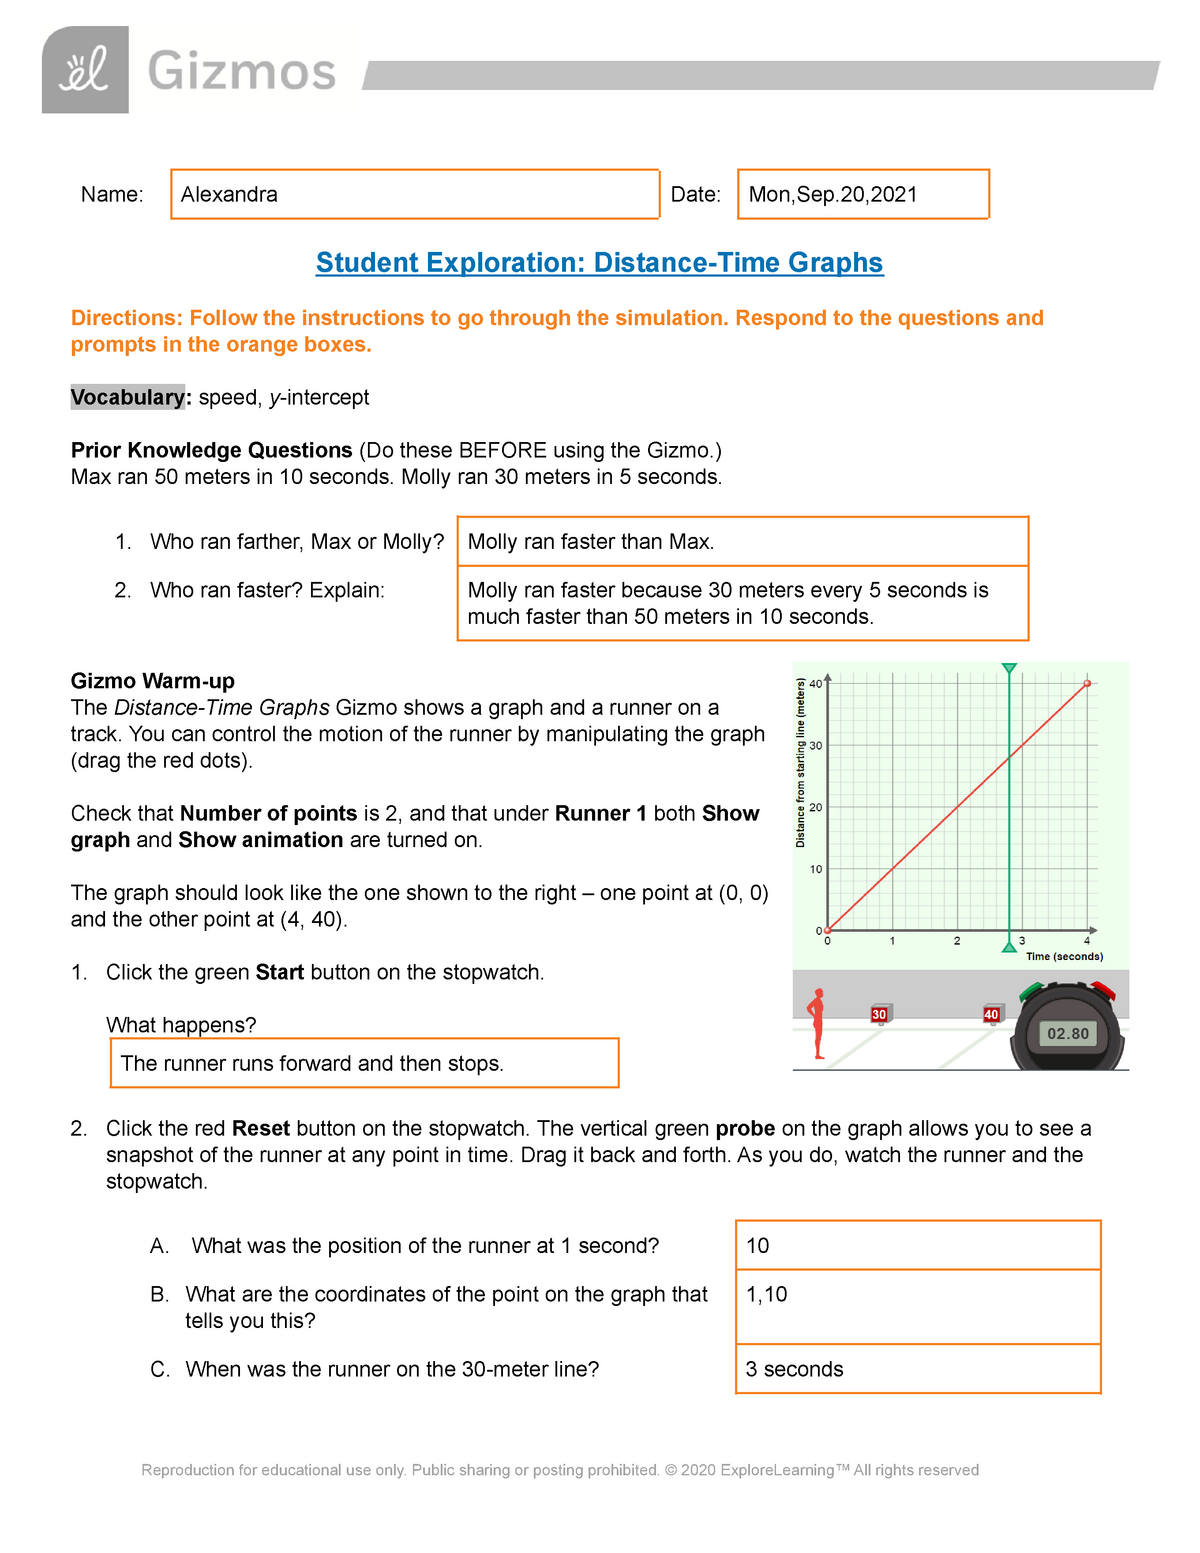 Worksheet Velocity Graph.pdf - Section: Name: Date: Velocity-Time Graph  Worksheet Part I: Time hours 1. Above is a velocity-time graph of a moving